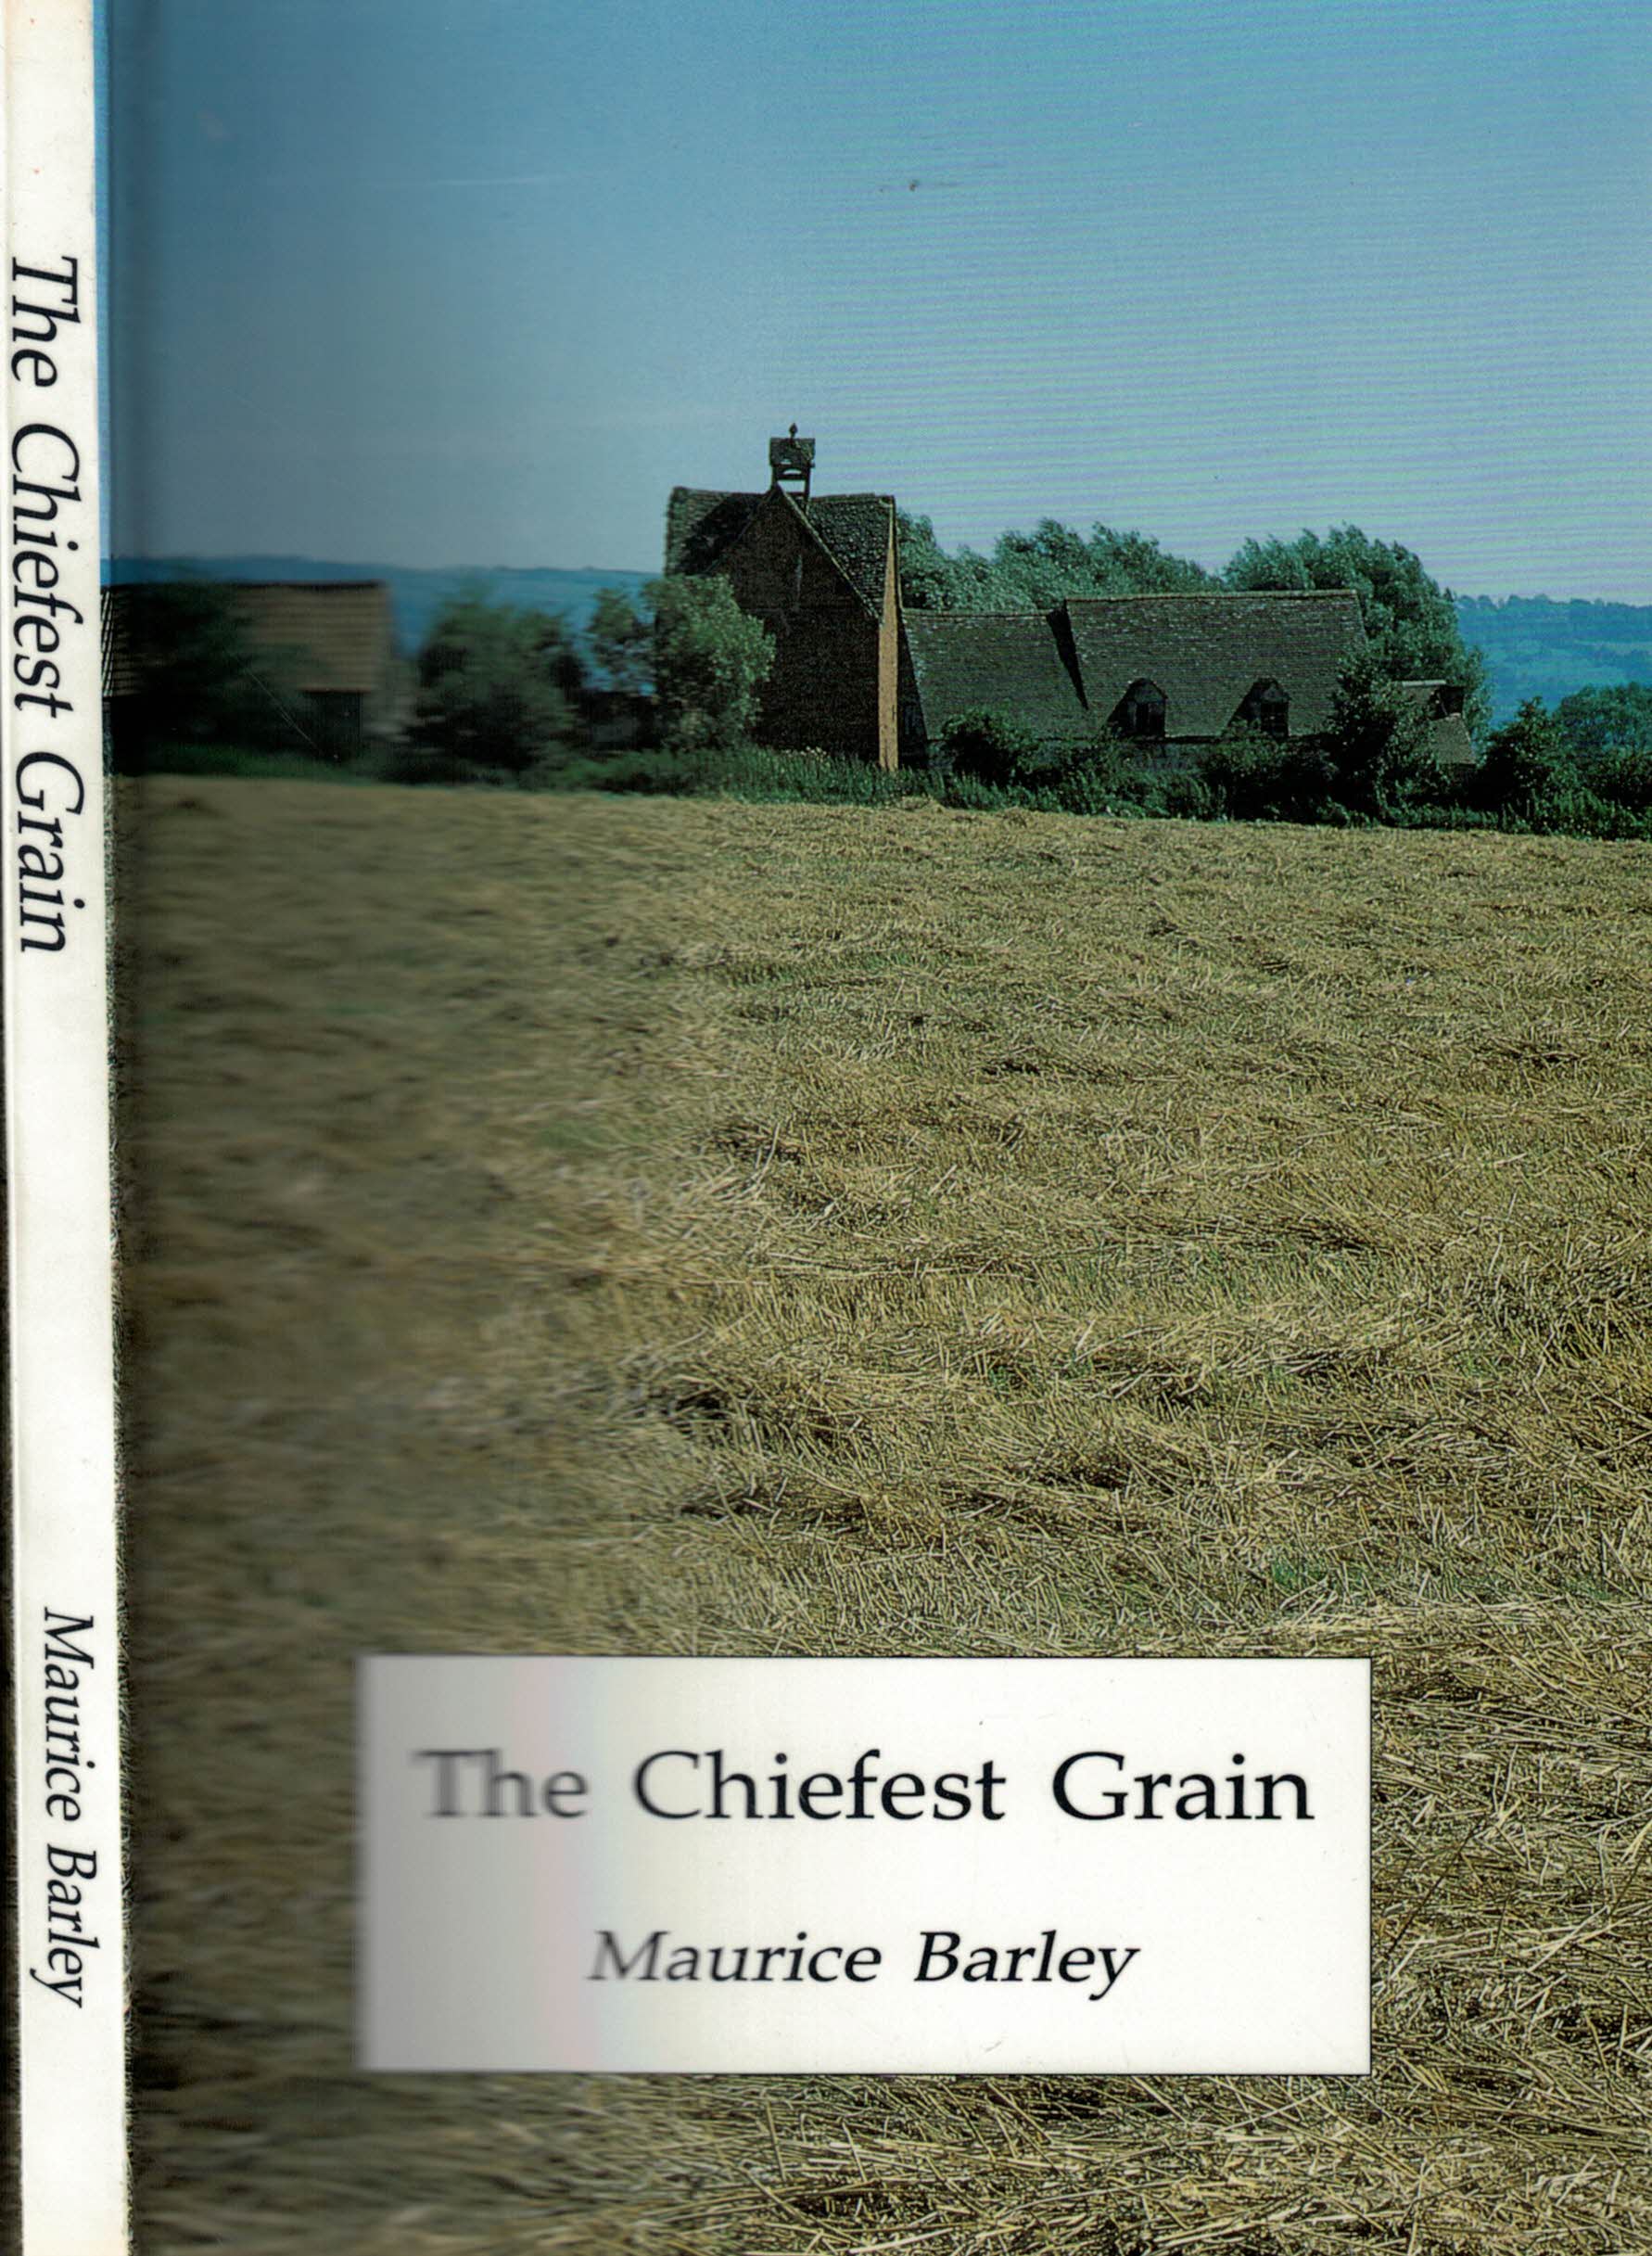 The Chiefest Grain